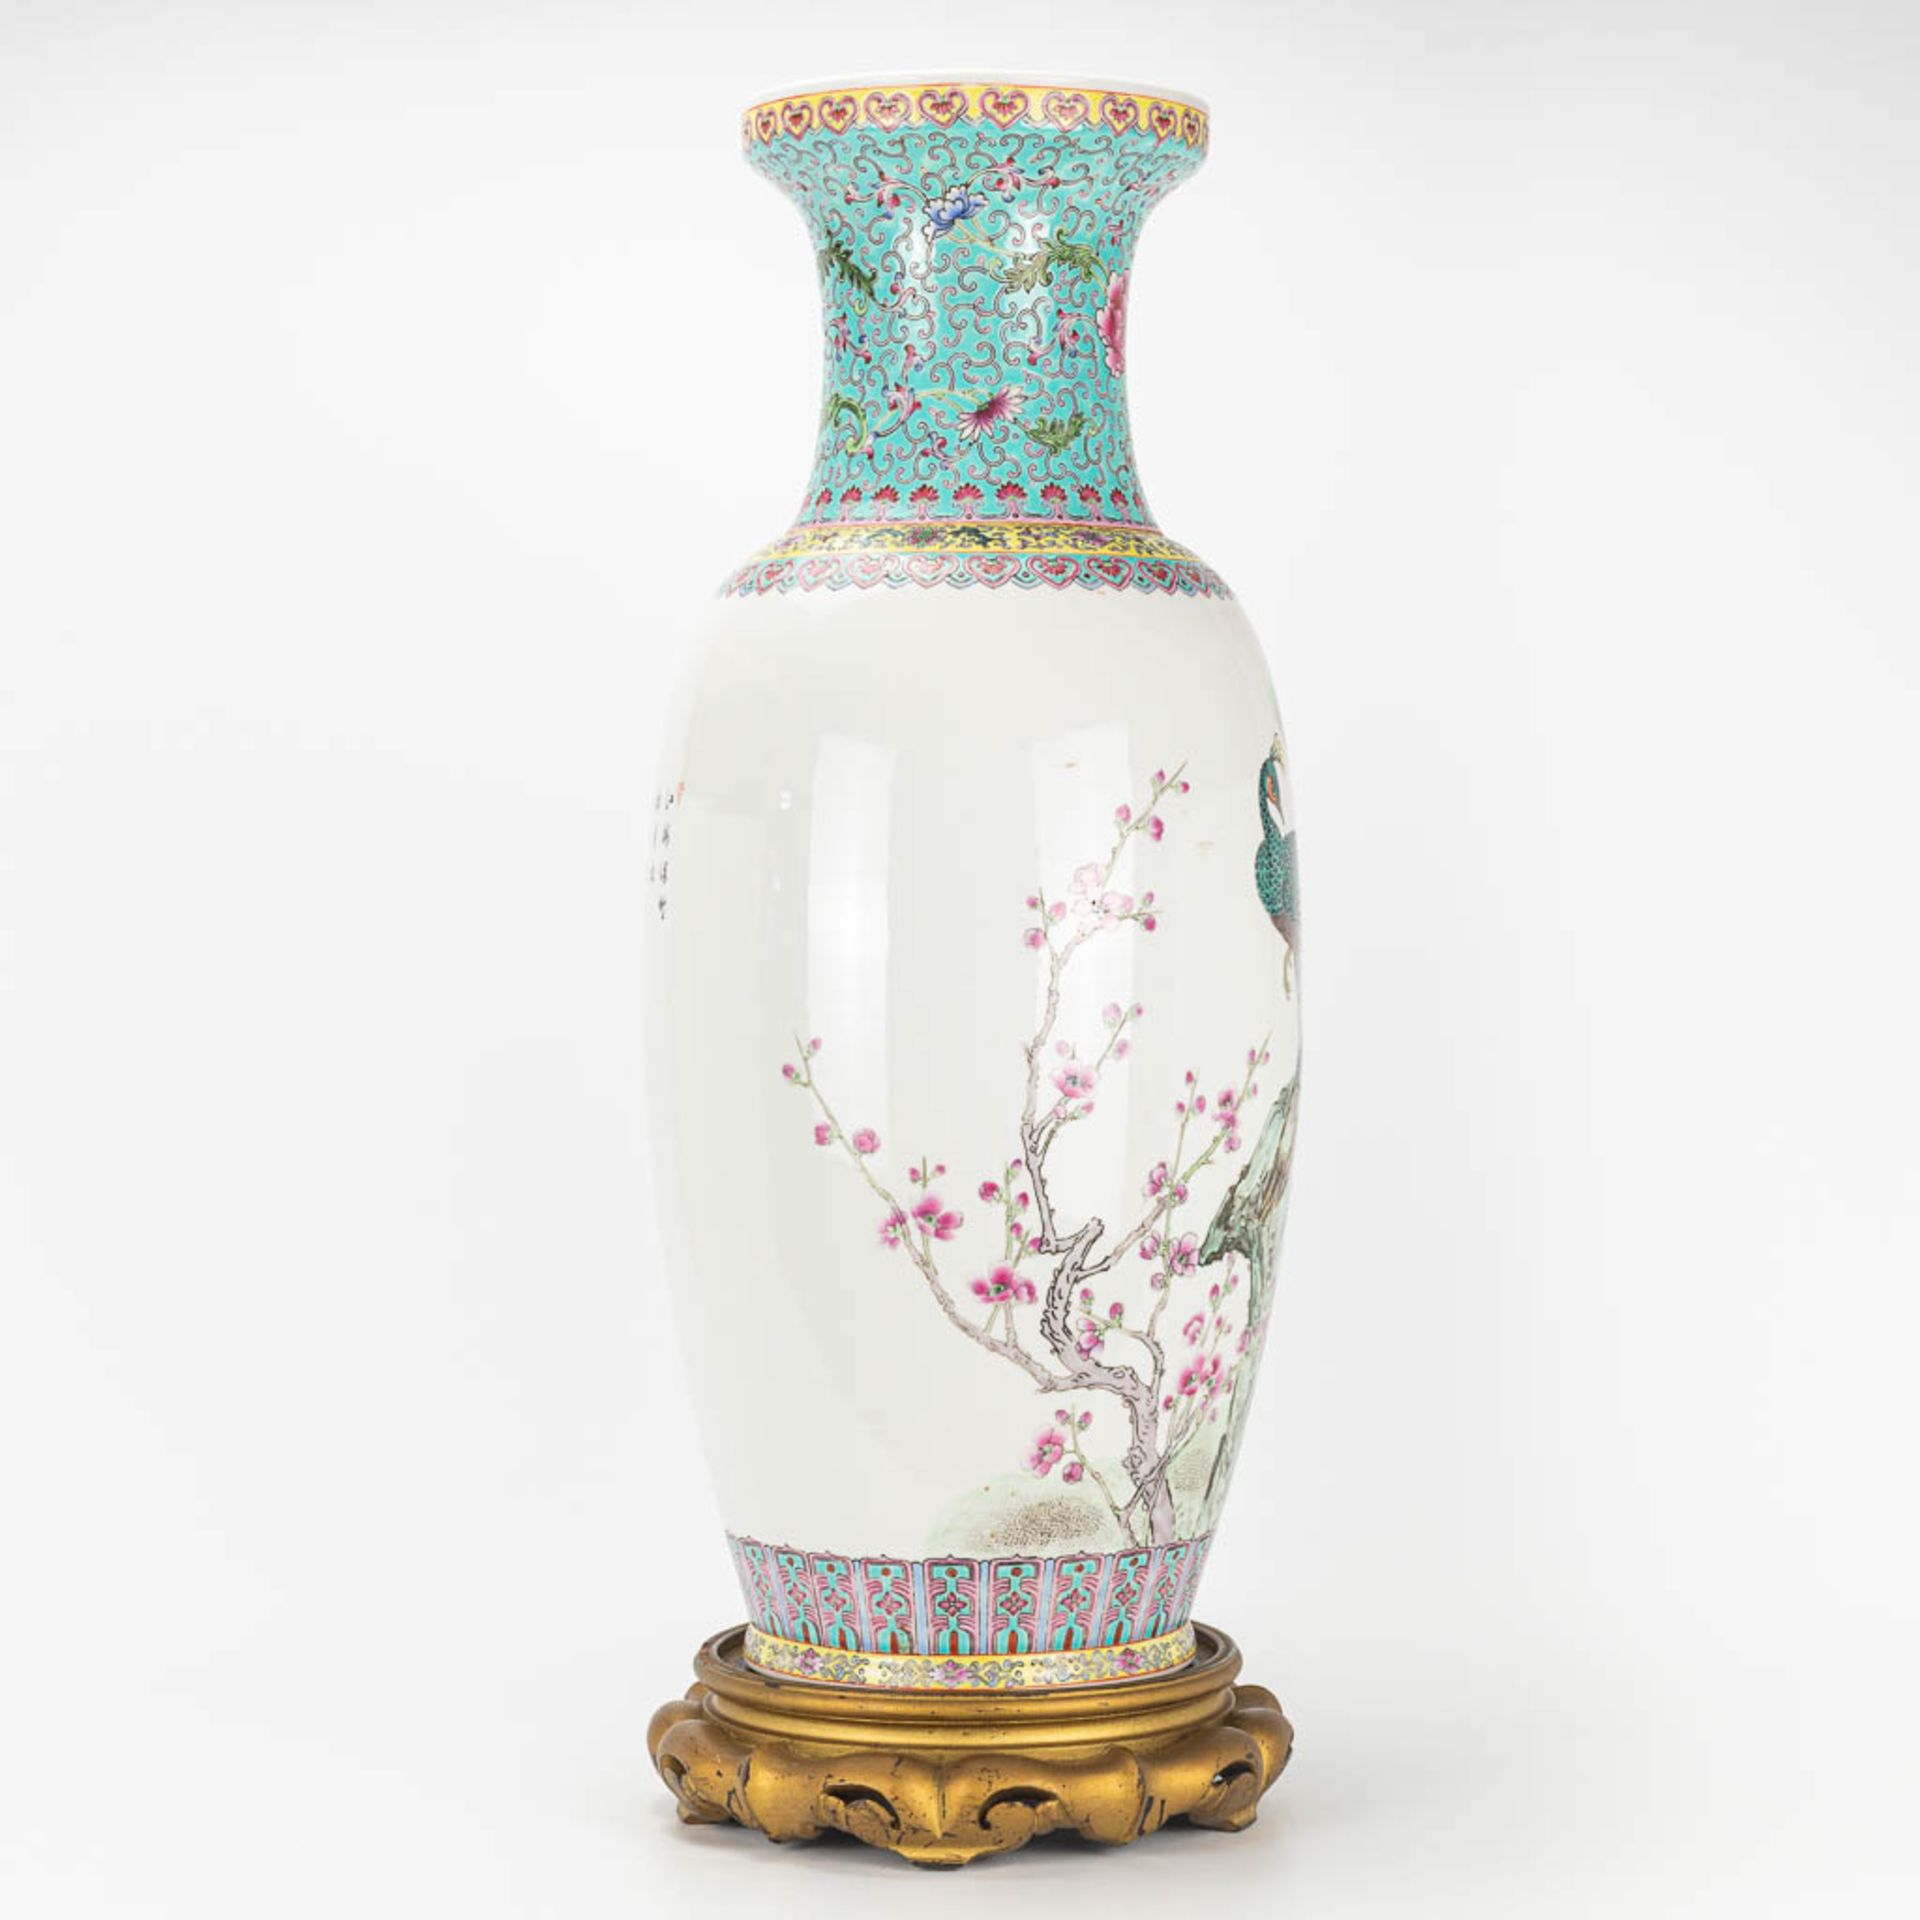 A vase made of Chinese porcelain and decorated with peacocks - Image 8 of 16